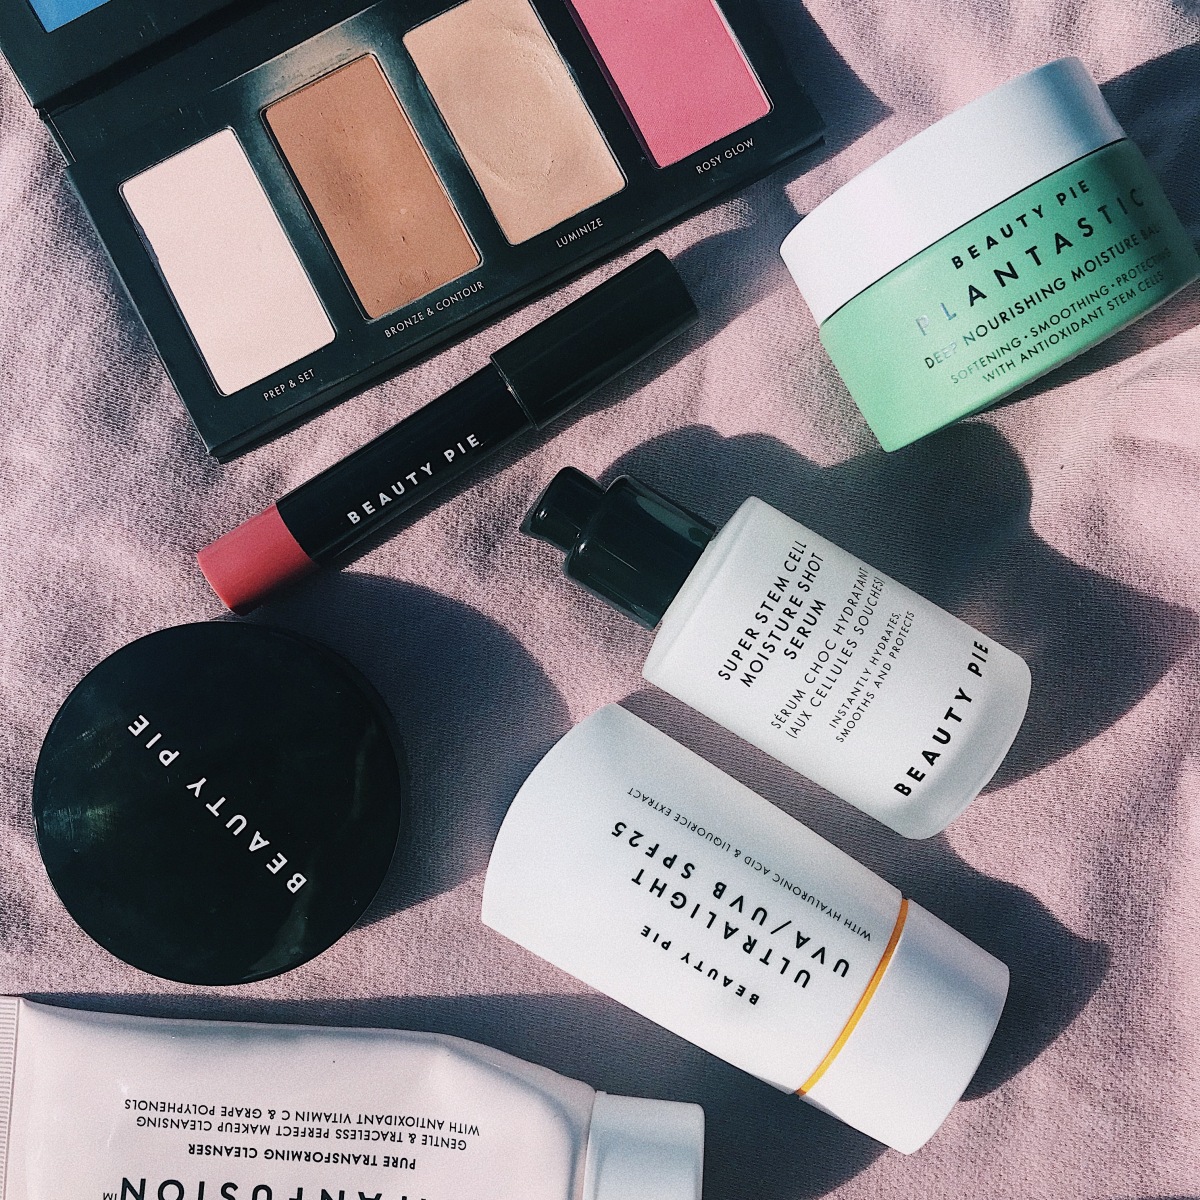 My Favourite Beauty Pie Products